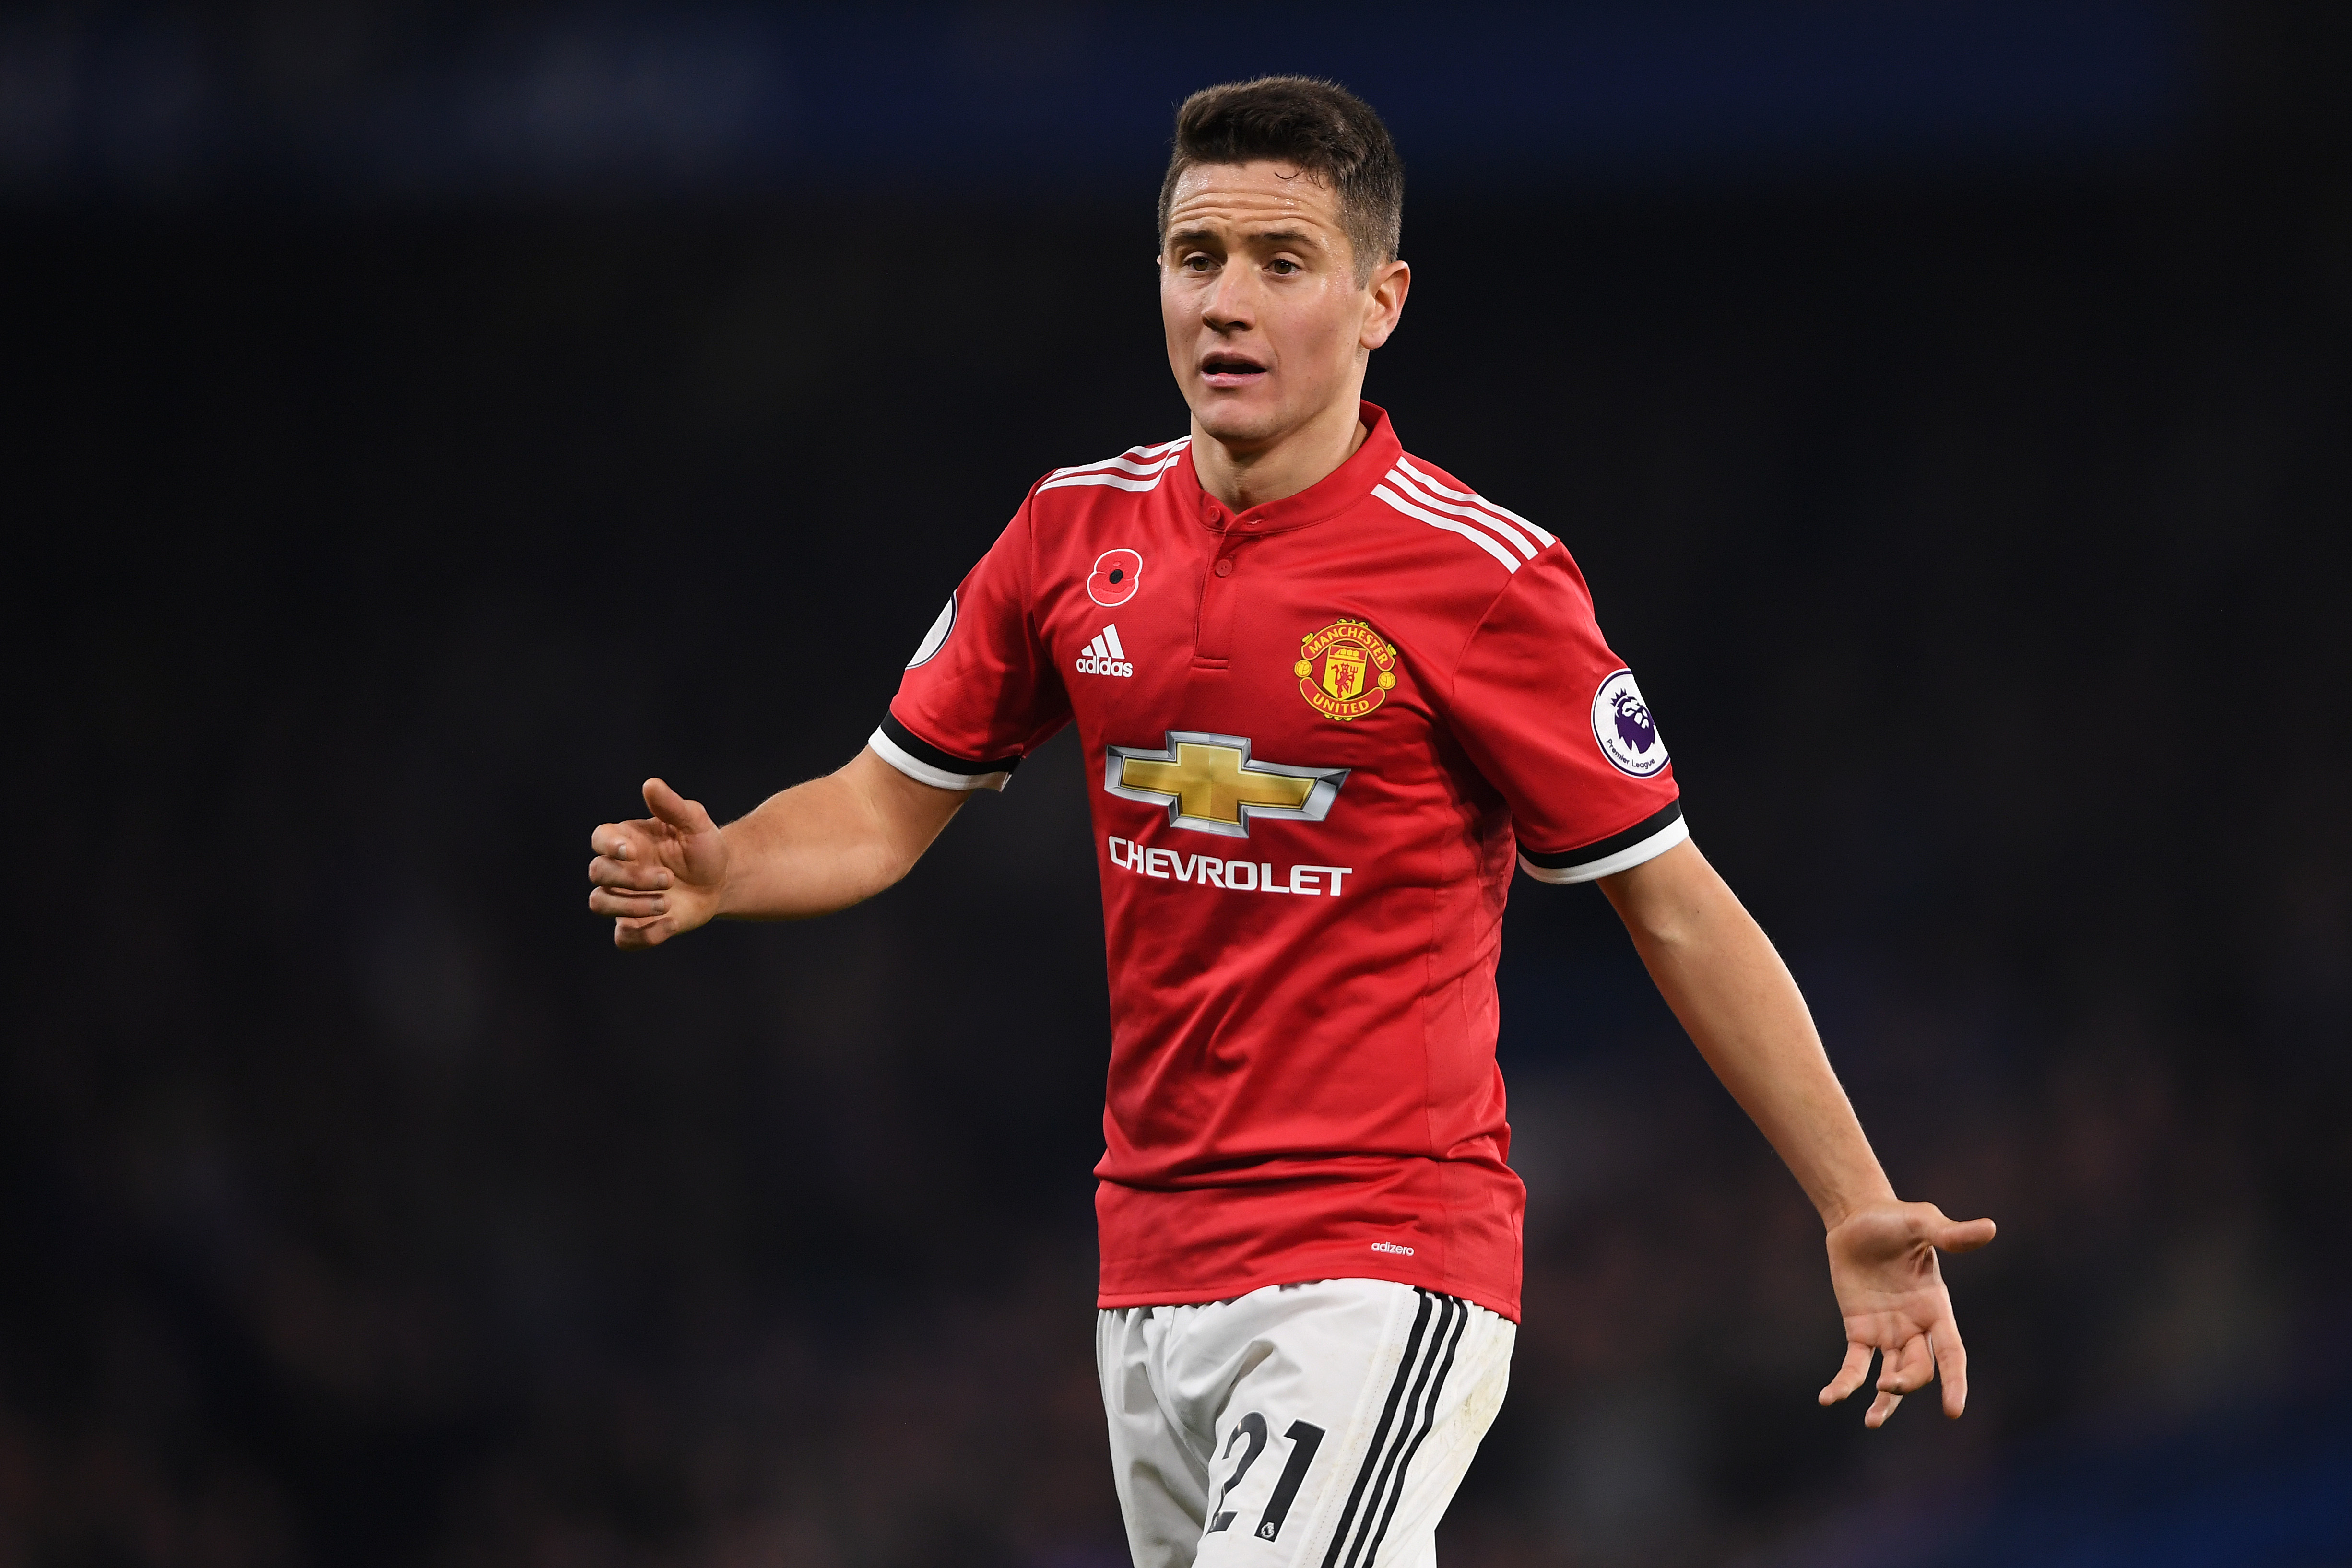 LONDON, ENGLAND - NOVEMBER 05:  Ander Herrera of Manchester United in action during the Premier League match between Chelsea and Manchester United at Stamford Bridge on November 5, 2017 in London, England.  (Photo by Mike Hewitt/Getty Images)